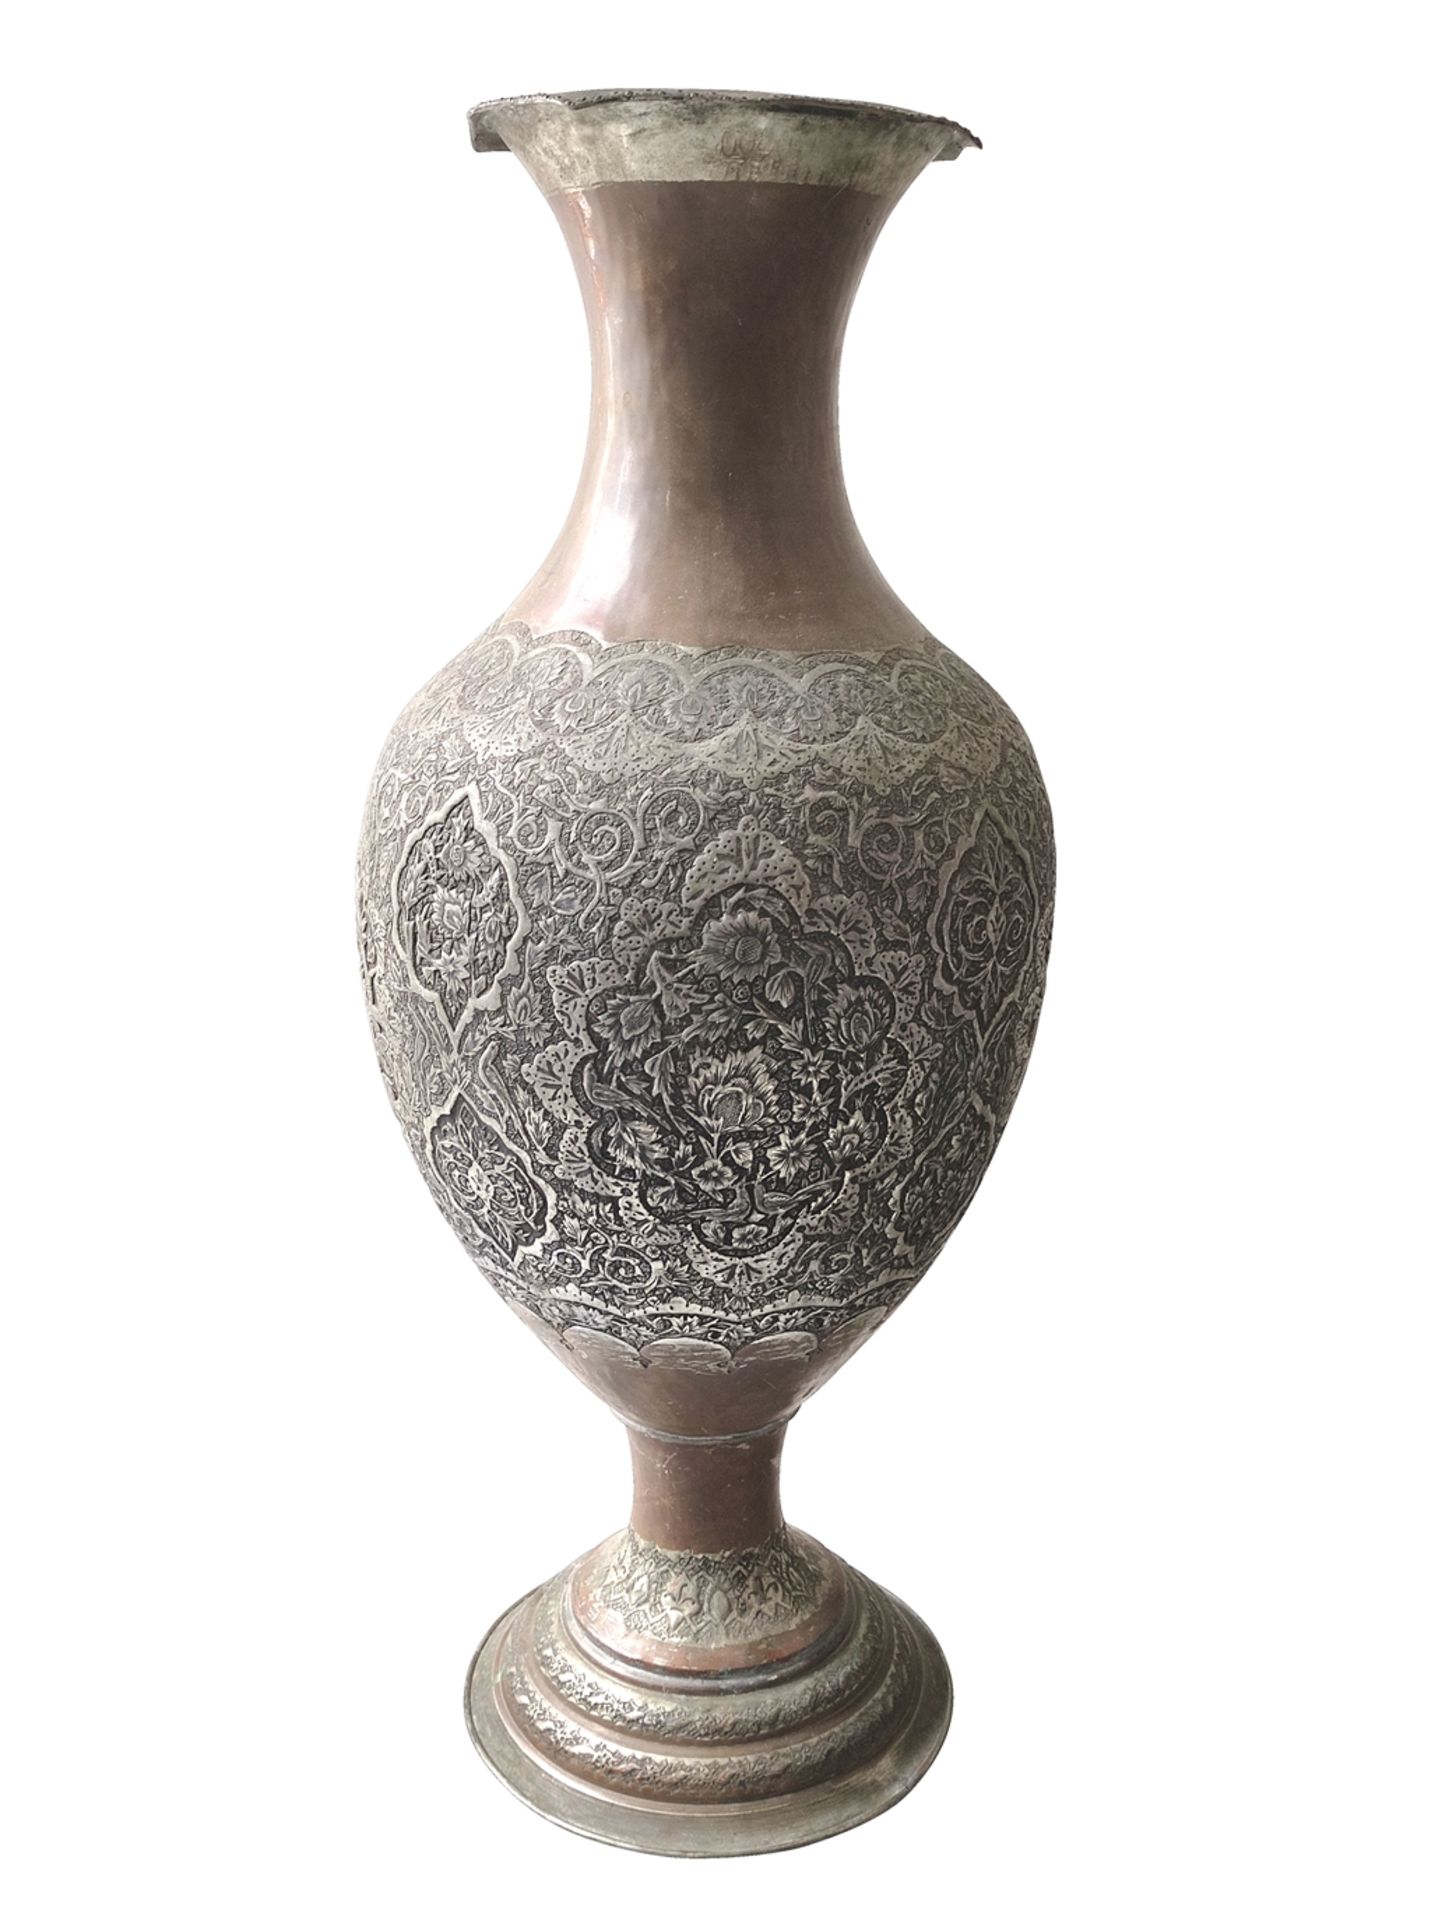 Large vase, bulged with flared rim, tapered below on round stand, fine chased floral decoration, me